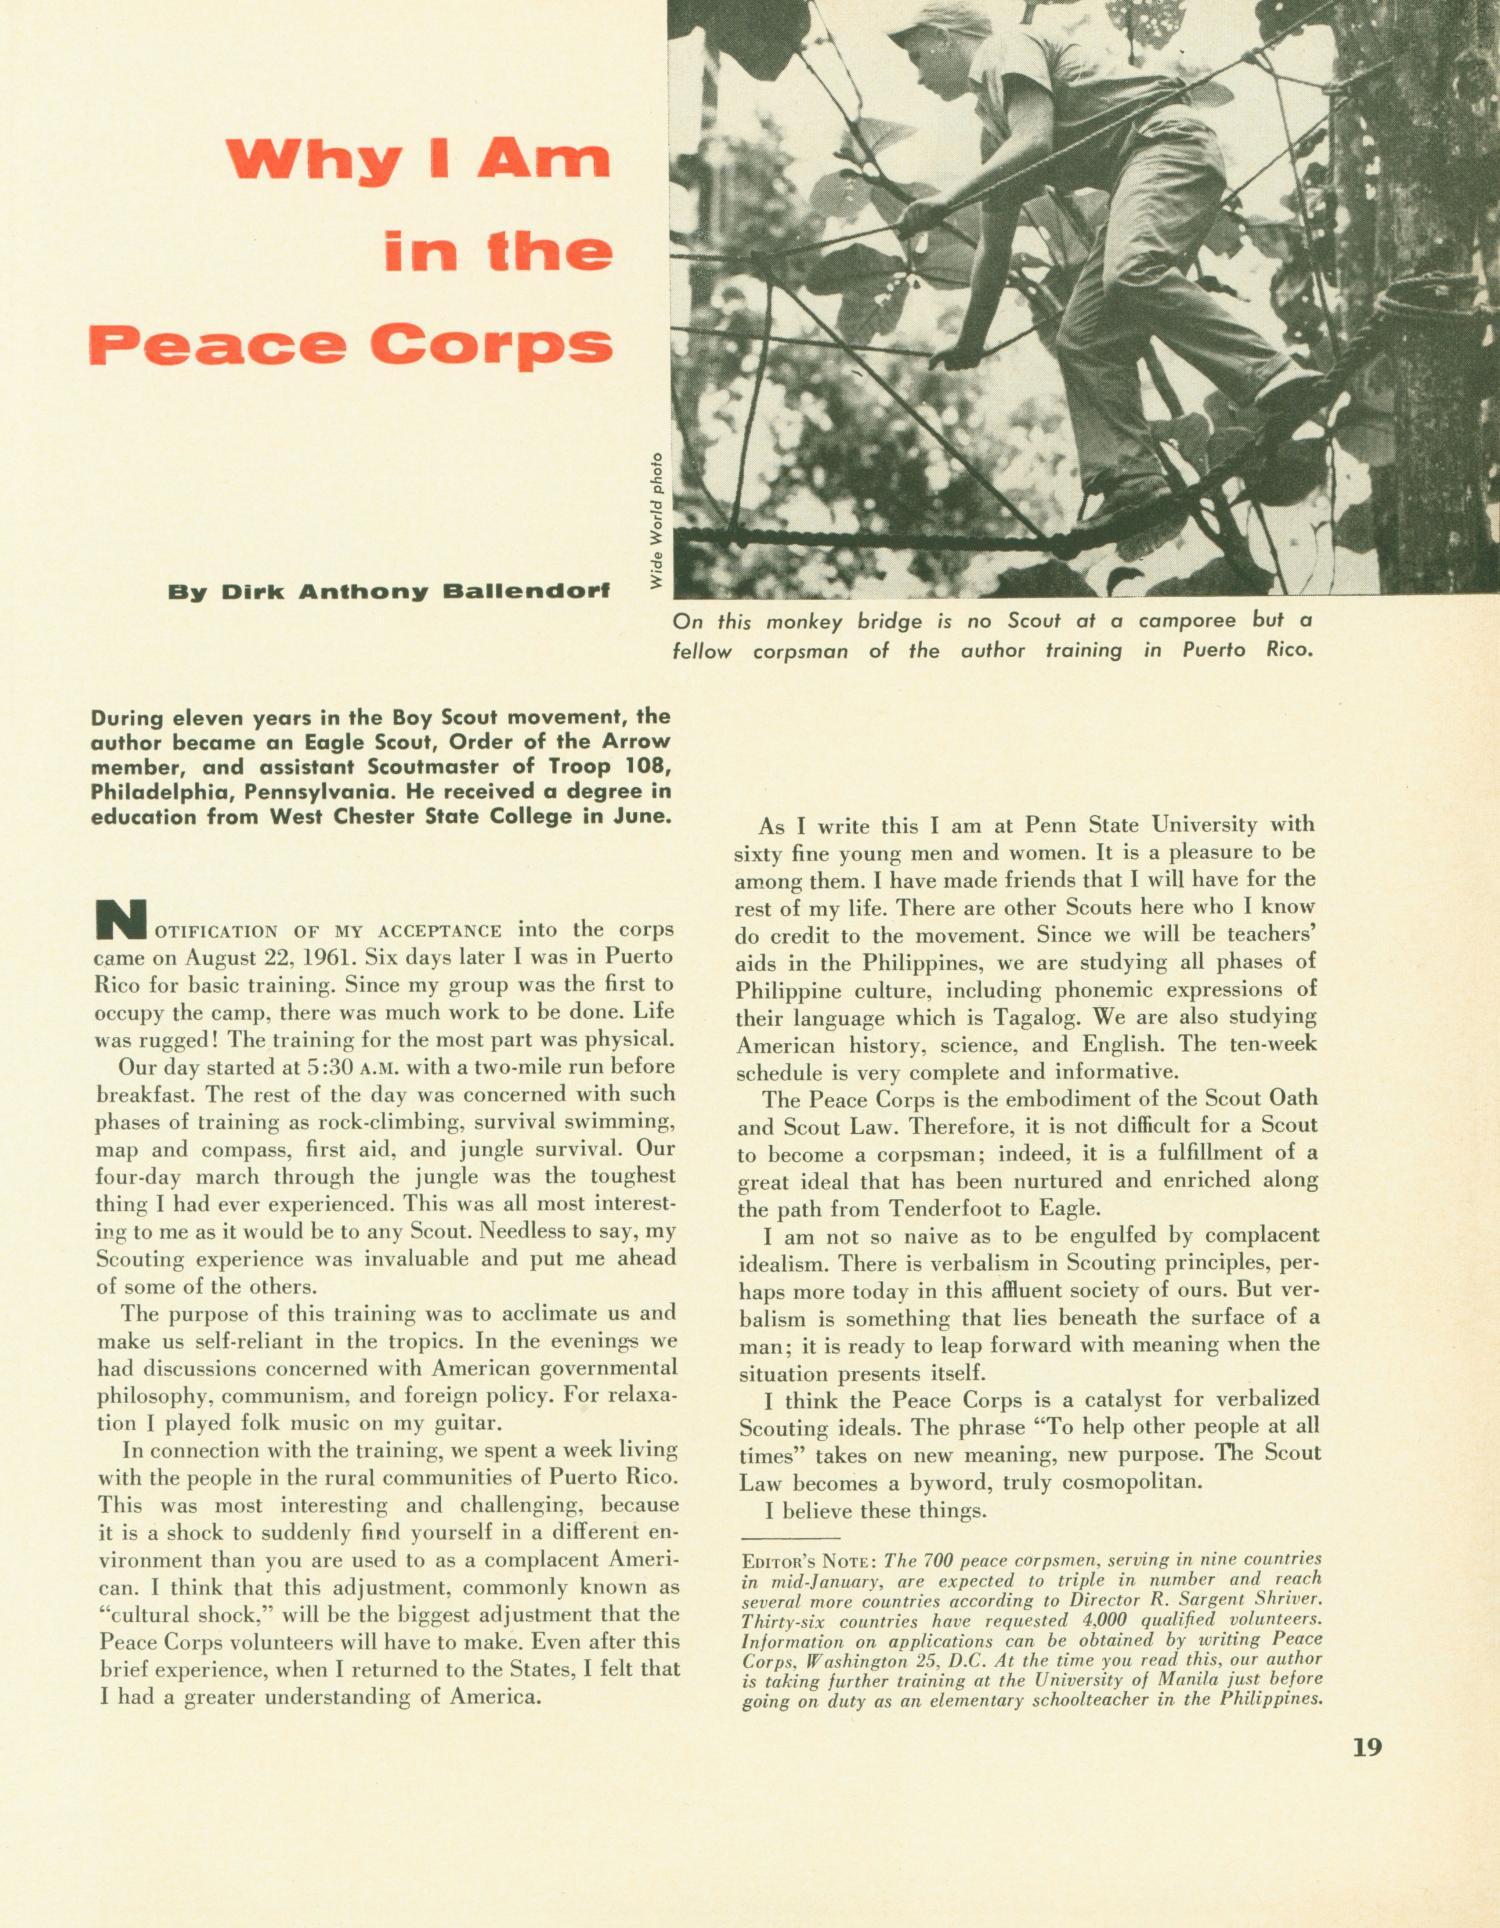 Scouting, Volume 50, Number 3, March 1962
                                                
                                                    19
                                                